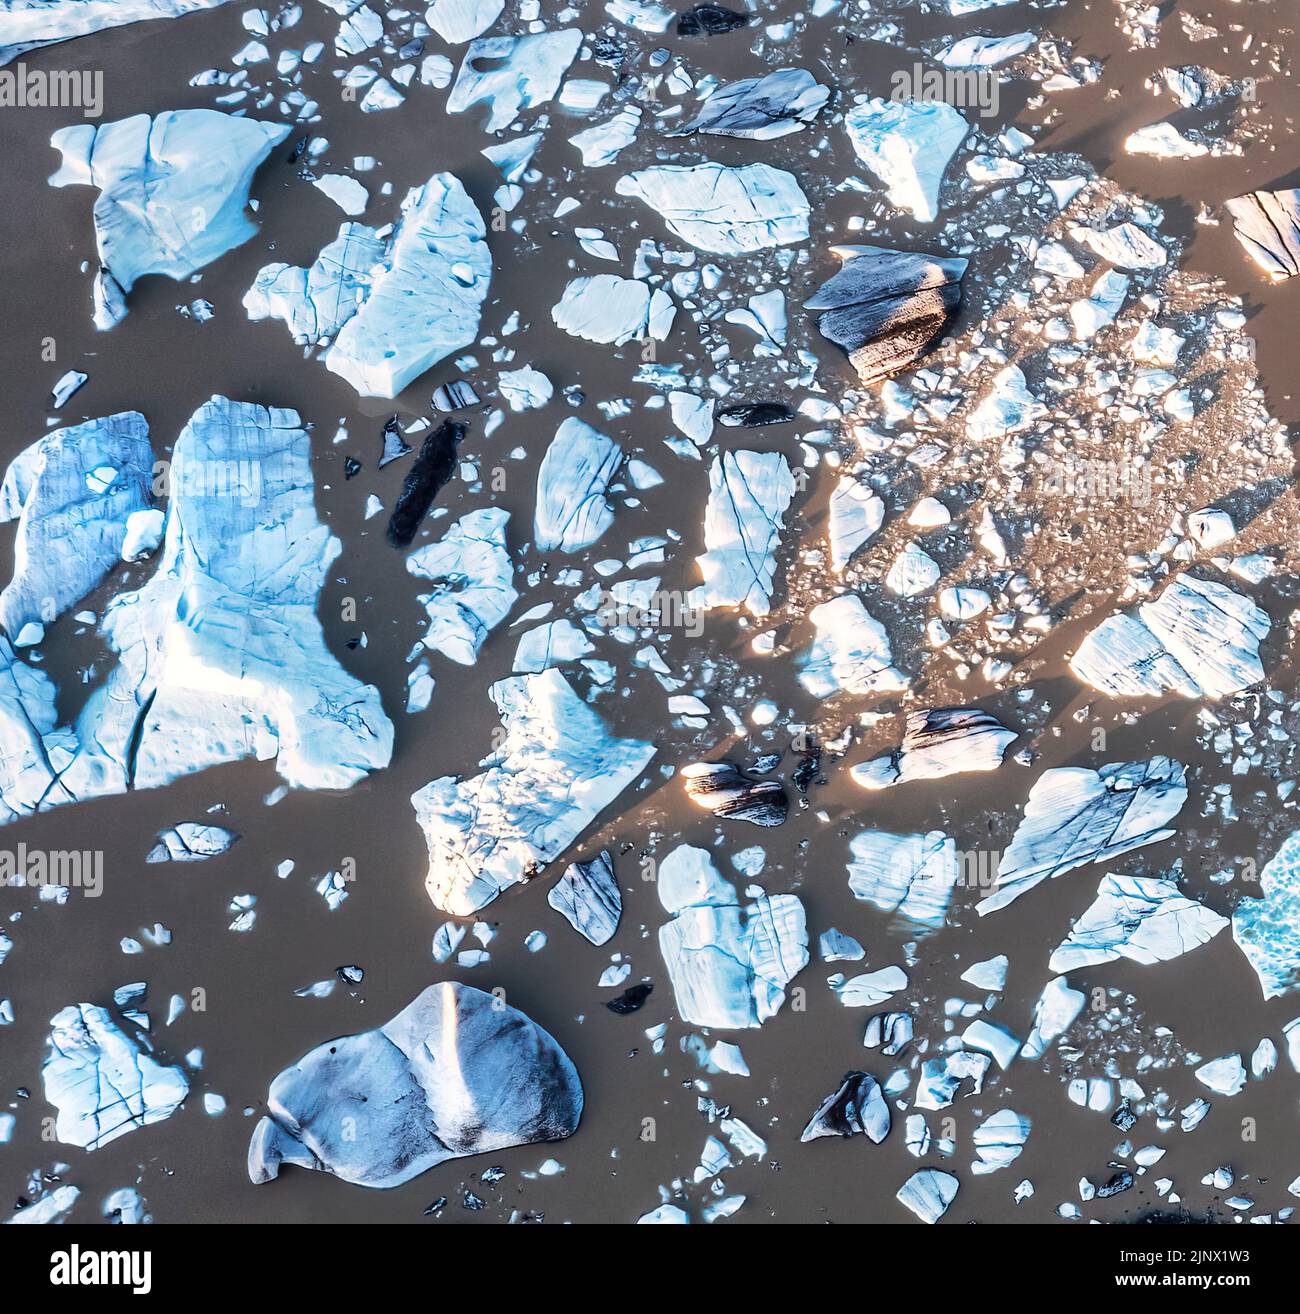 Overhead view of blue icebergs in the Fjallsarlon glacier lagoon, southern Iceland. The surrounding water is brown due to volcanic silt deposits. Dron Stock Photo